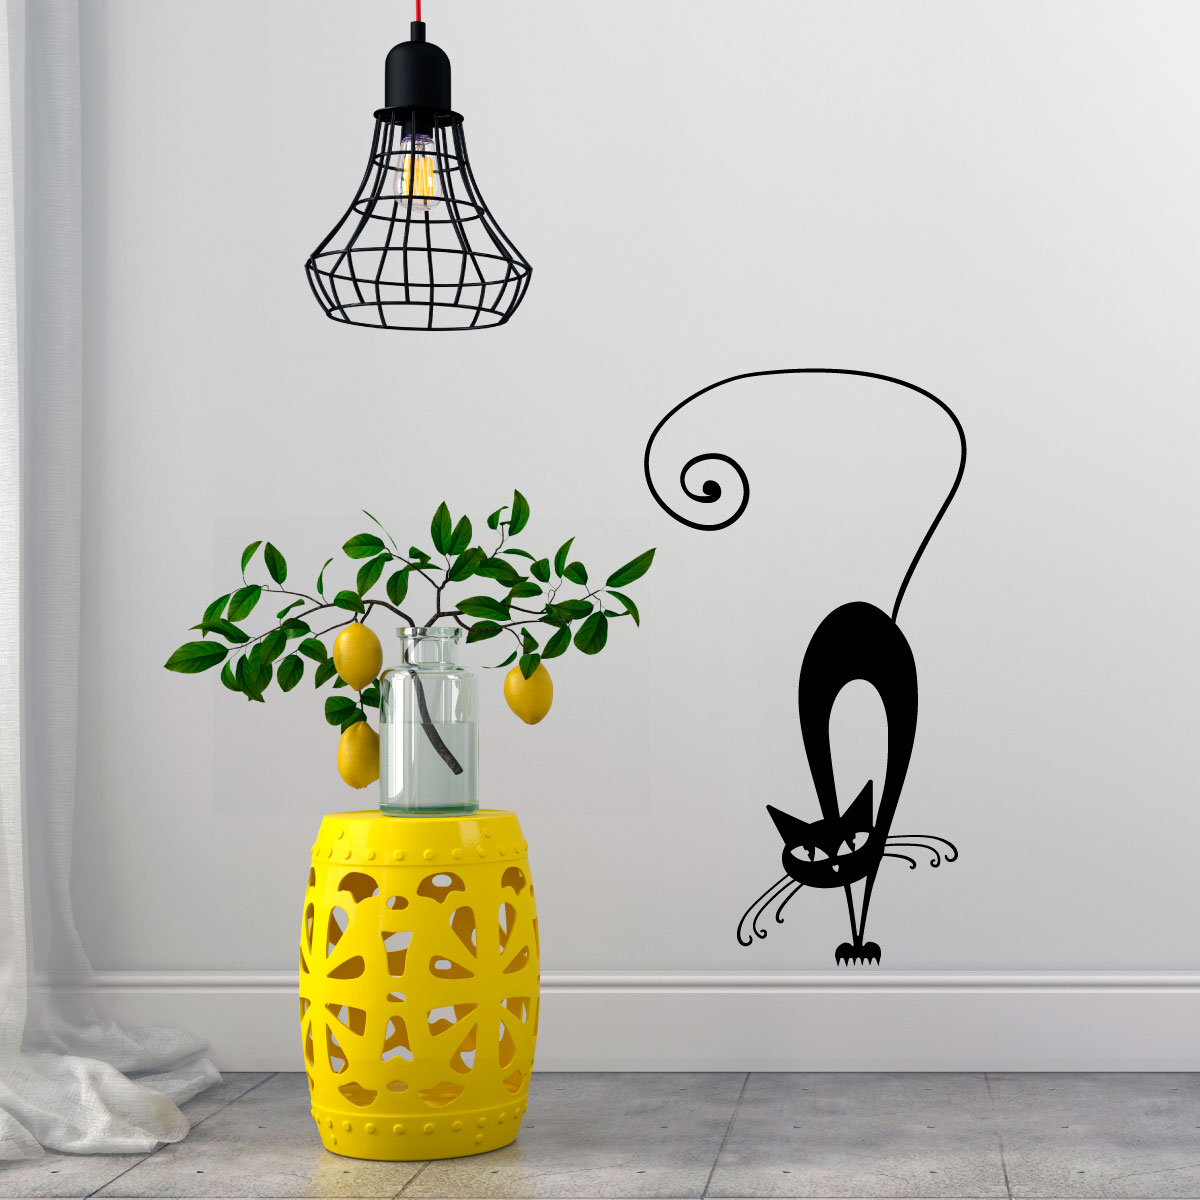 Great Cat Wall decal